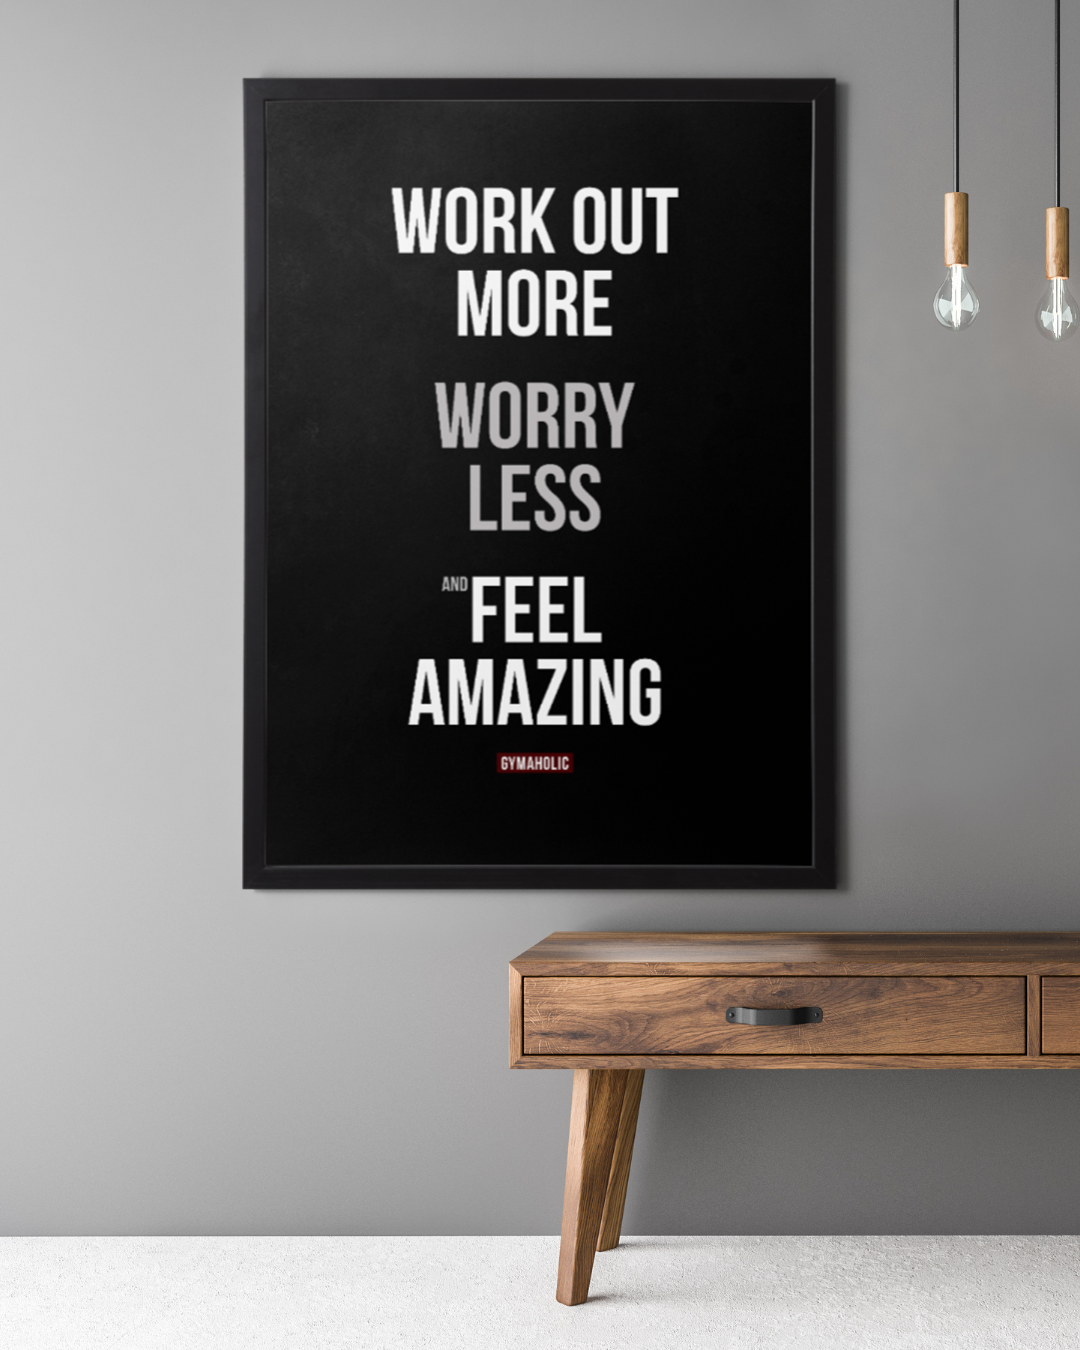 Work out more, worry less, and feel amazing. #gymaholic